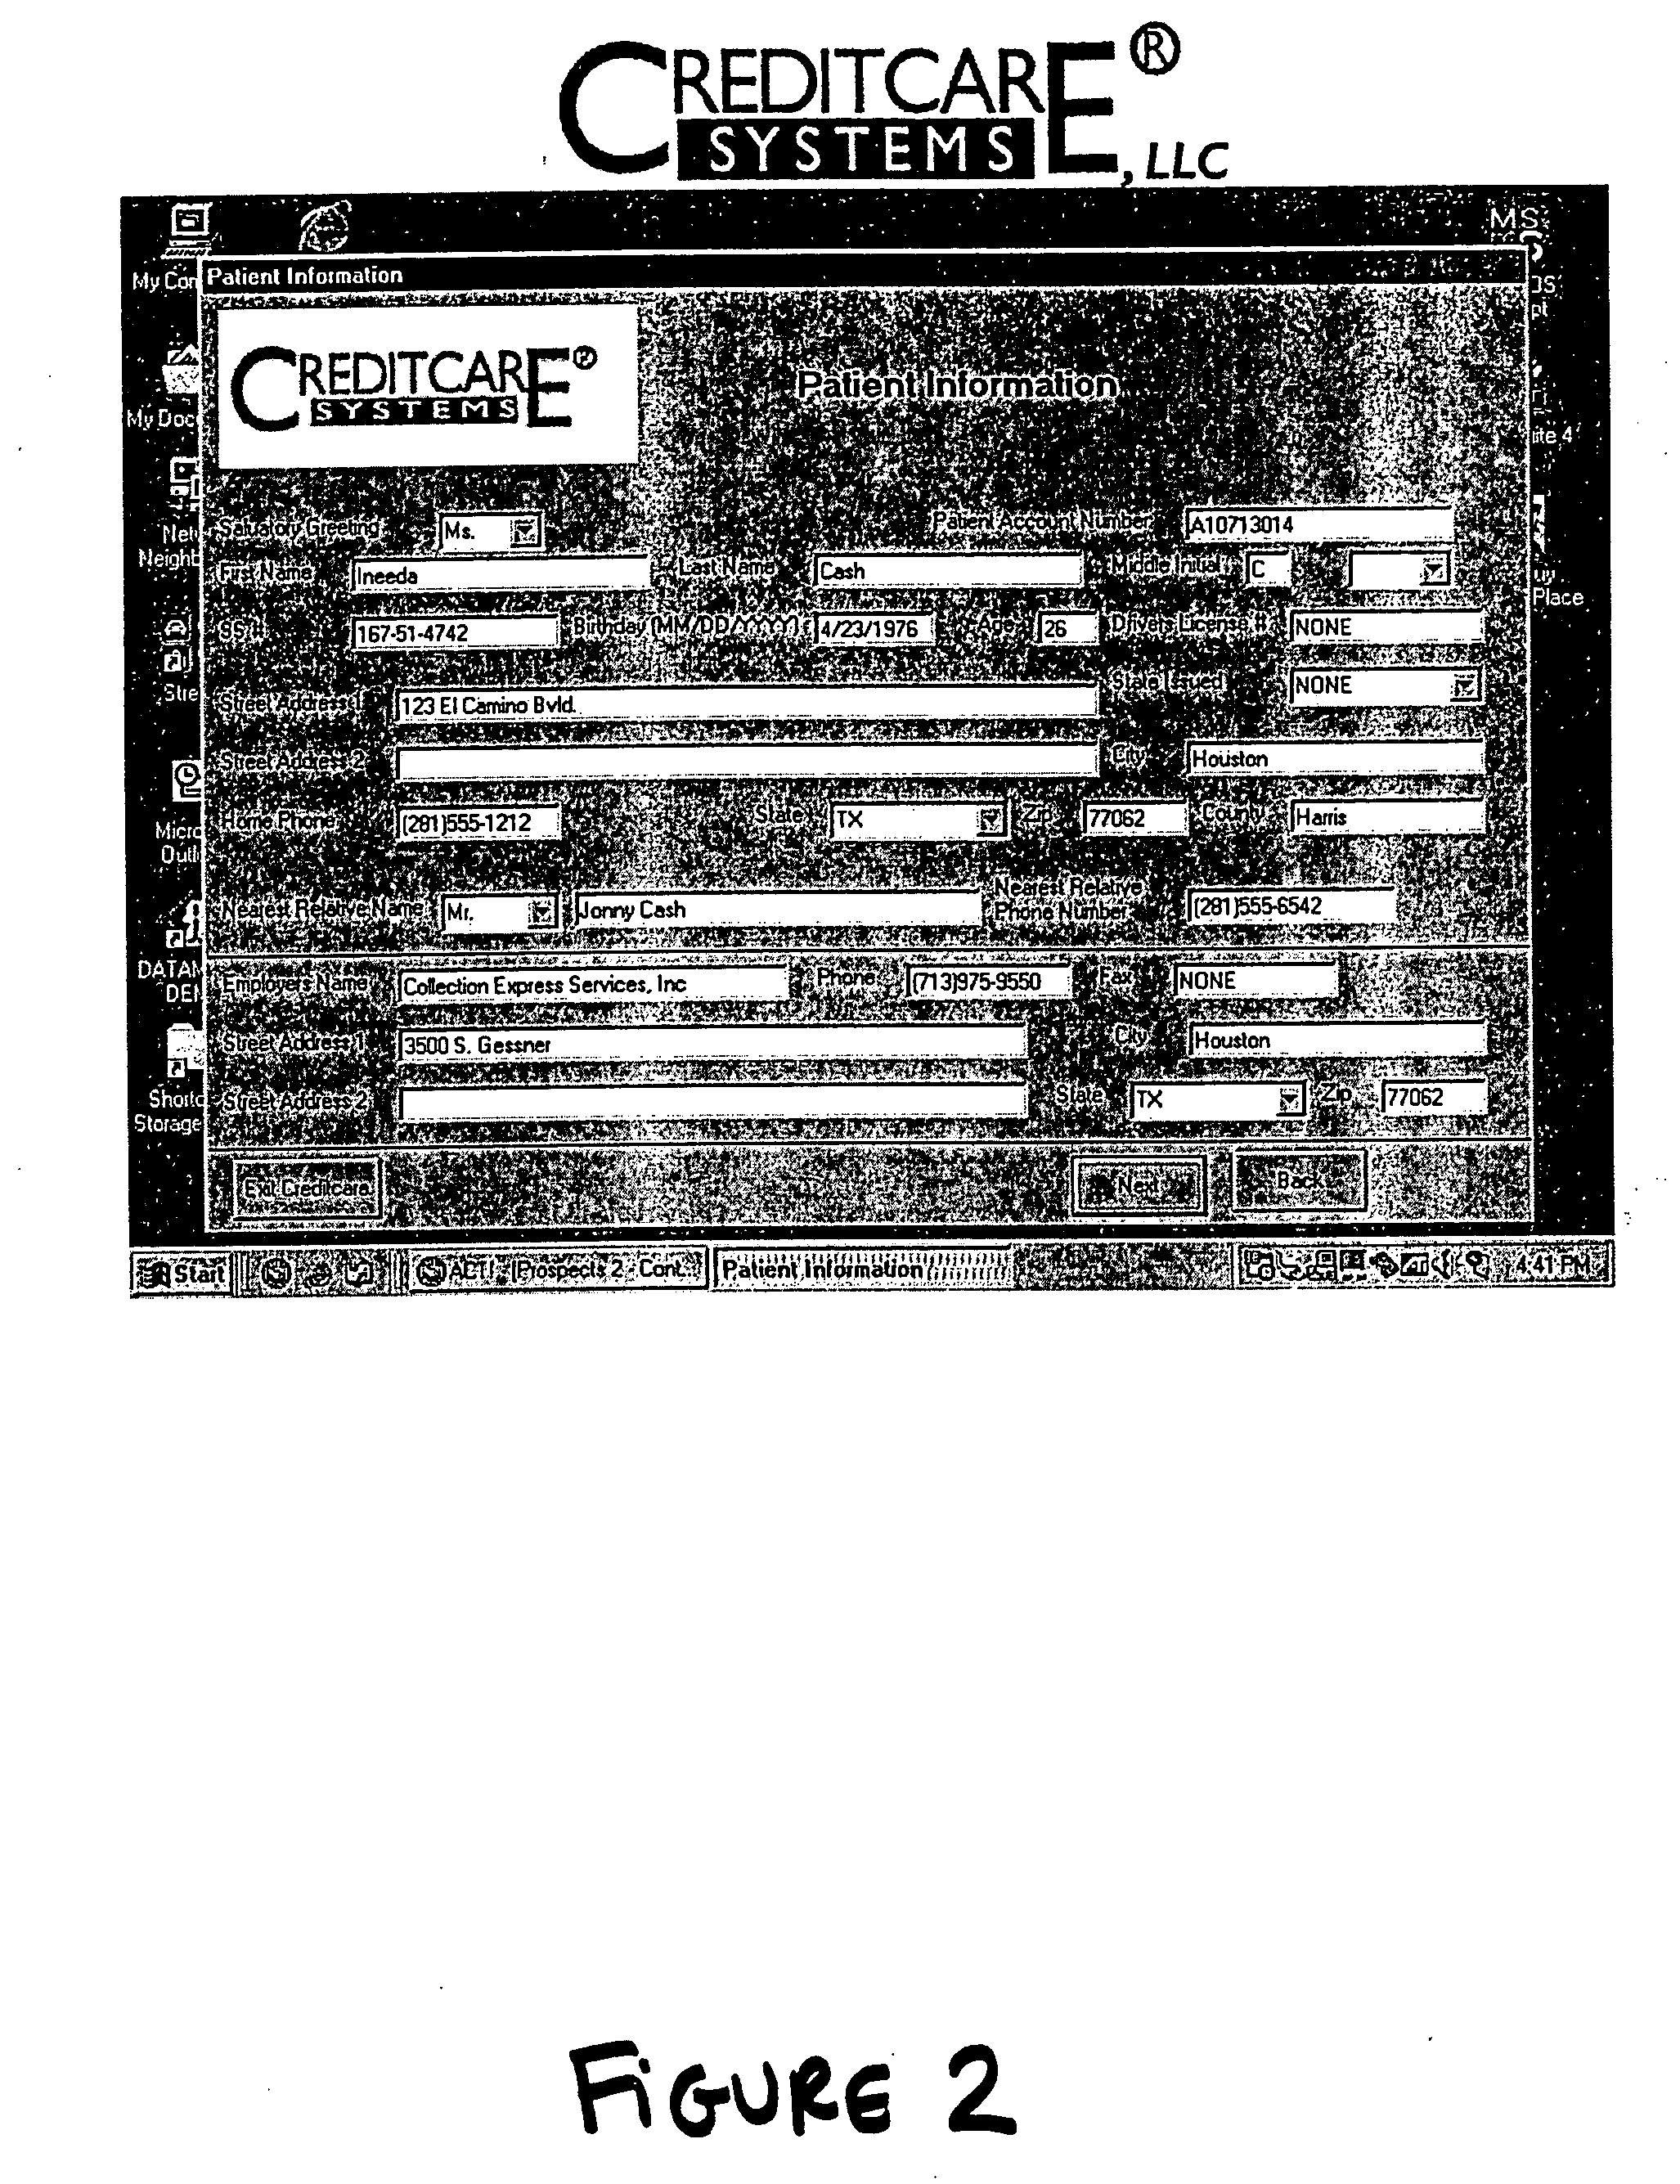 Method and system for obtaining payment for healthcare services using a healthcare note servicer